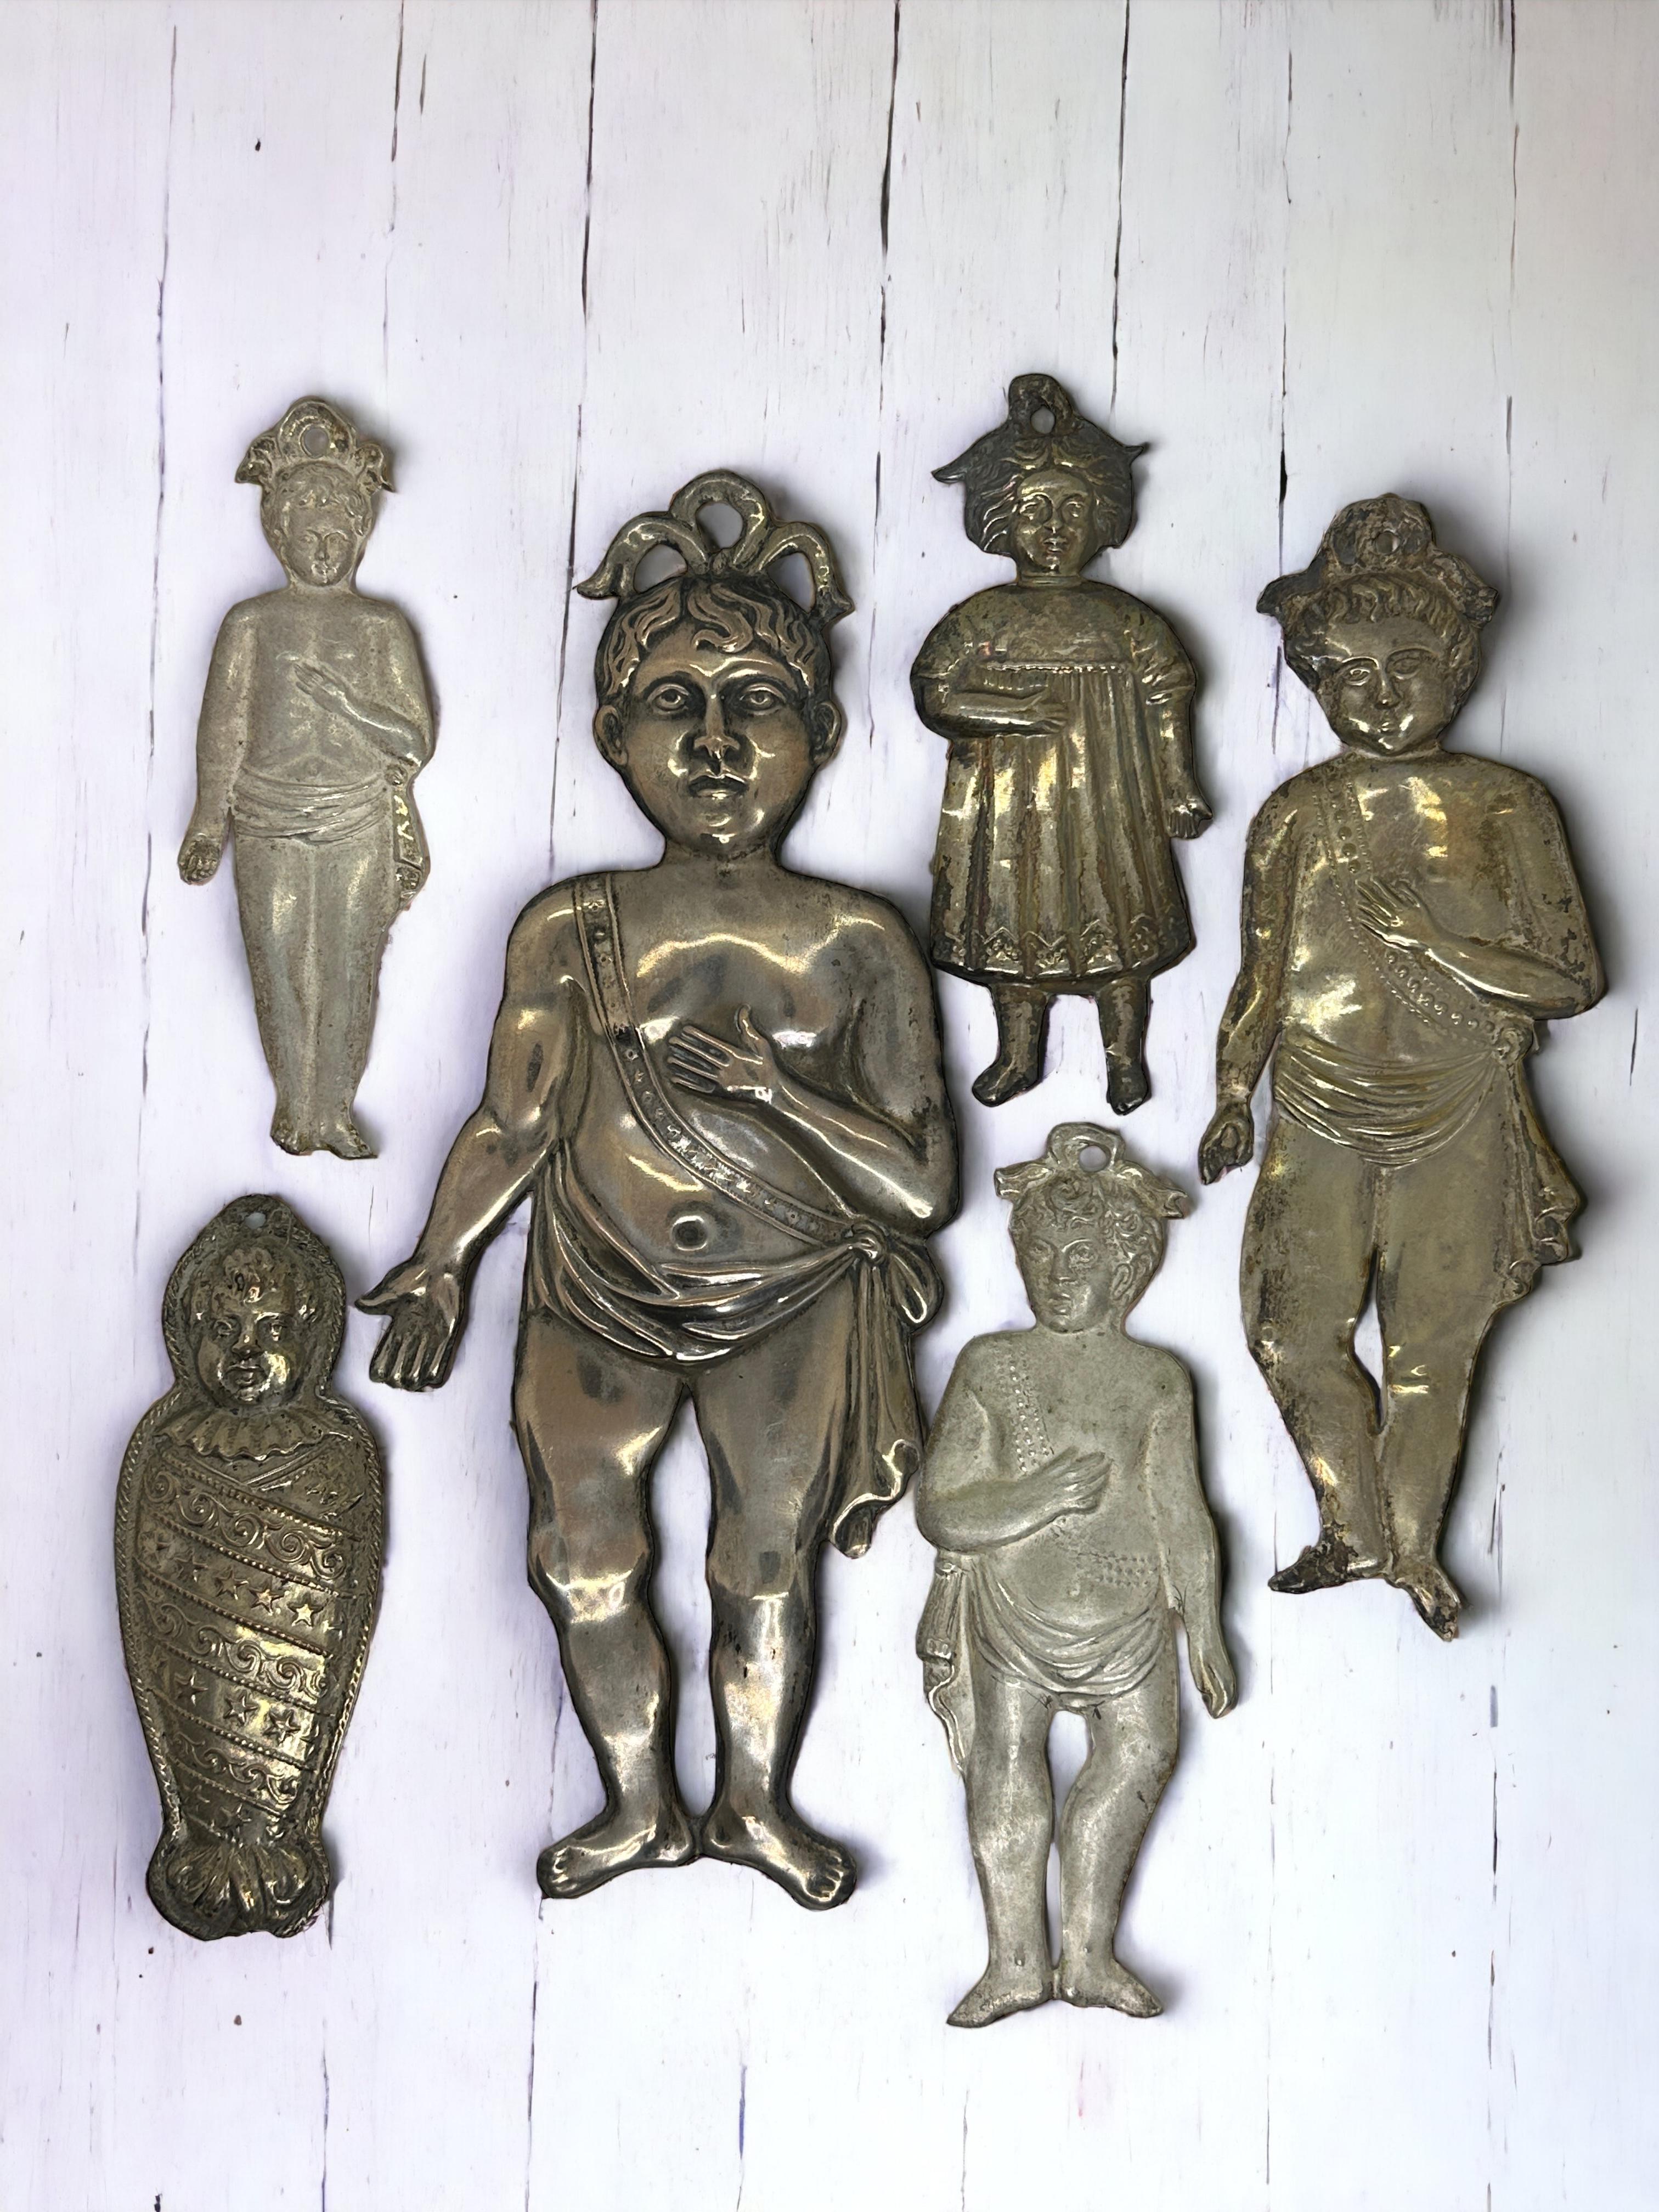 A collection of six cute petite religious Ex Voto. I do not know what it is made of, thin and light filigree silver or silver plated metal. Each is handmade, embossed and then welded. Given the delicacy, I did not try to remove the tarnish and I